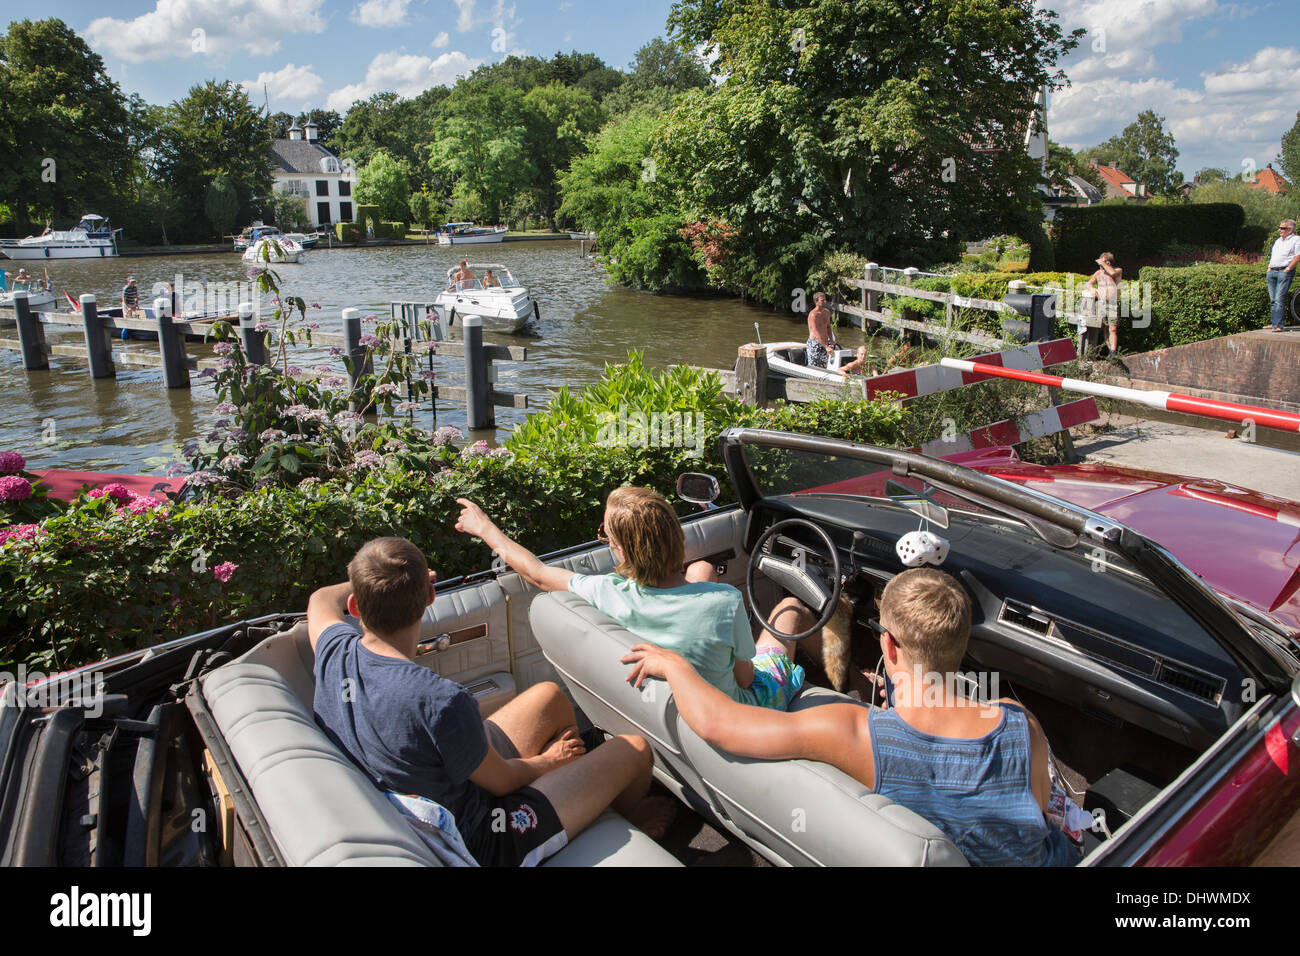 Netherlands, Loenen aan de Vecht. River Vecht. Boys in old fashioned car looking at yachts in the river Stock Photo